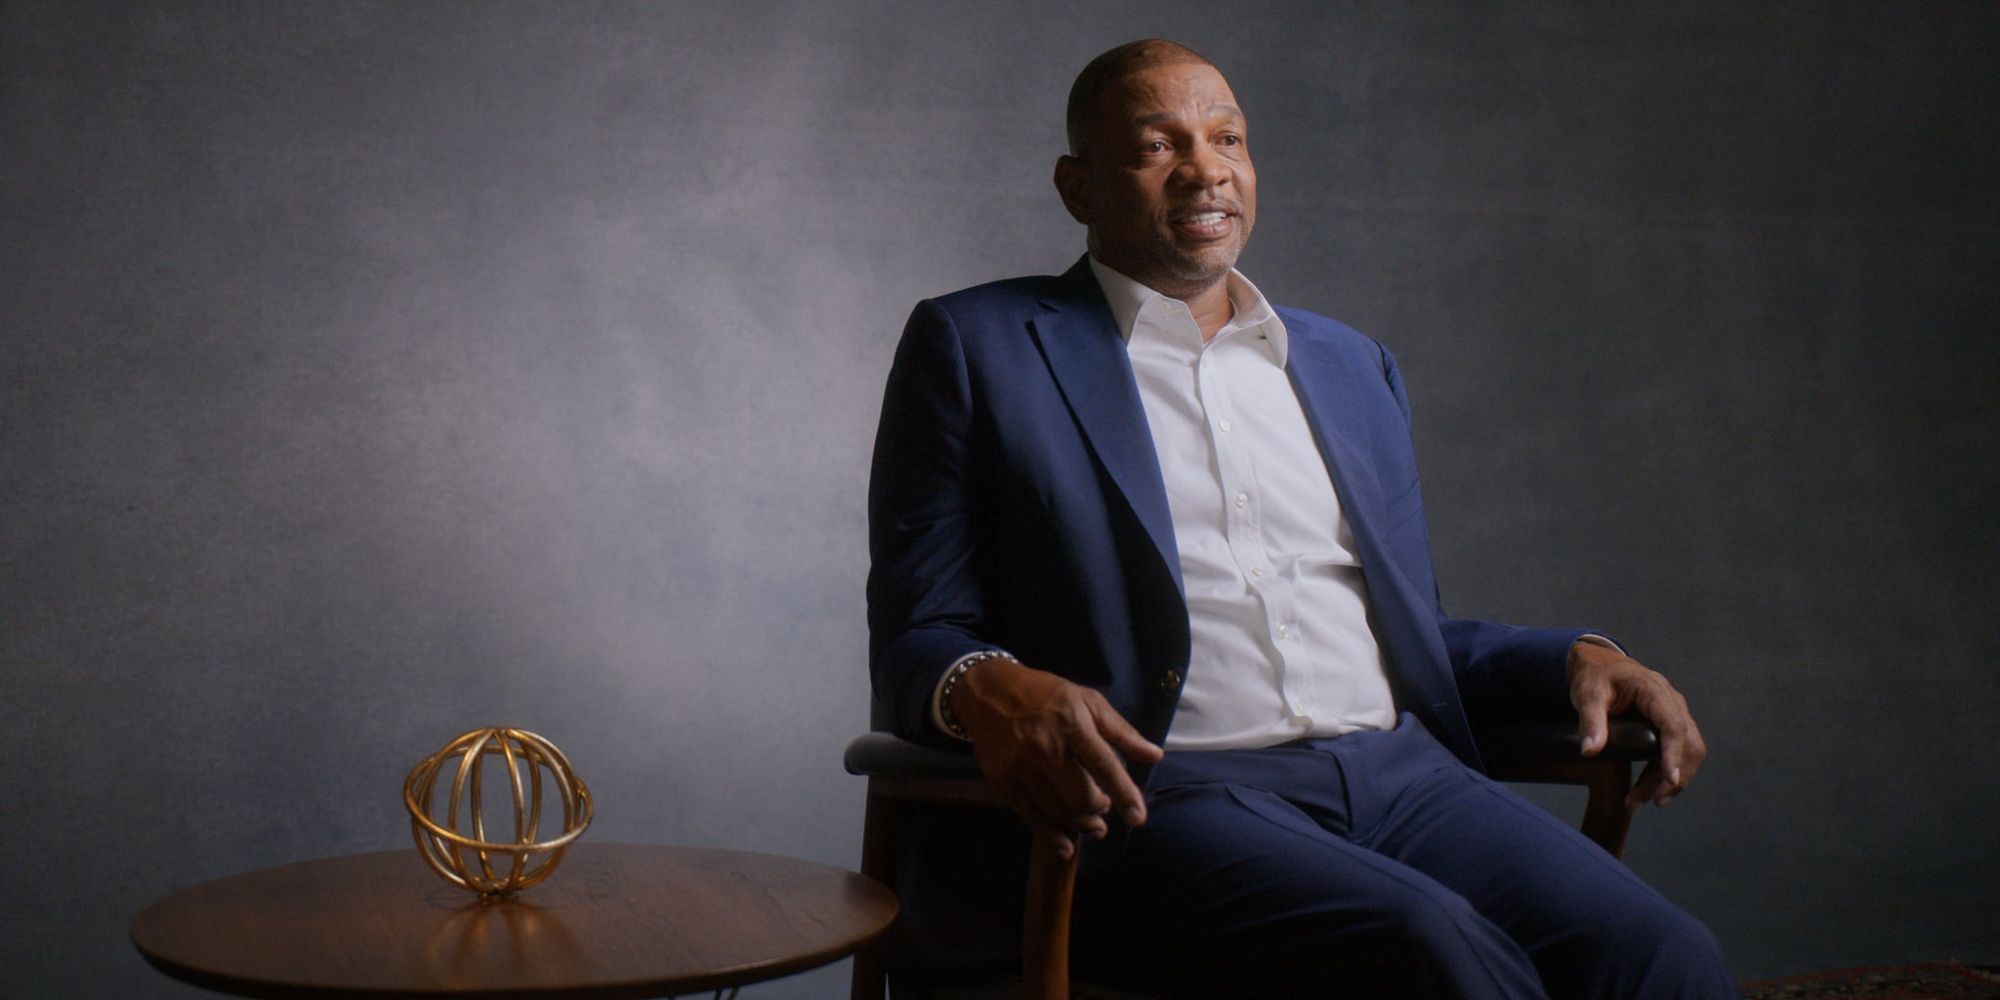 Doc Rivers sits down for an interview